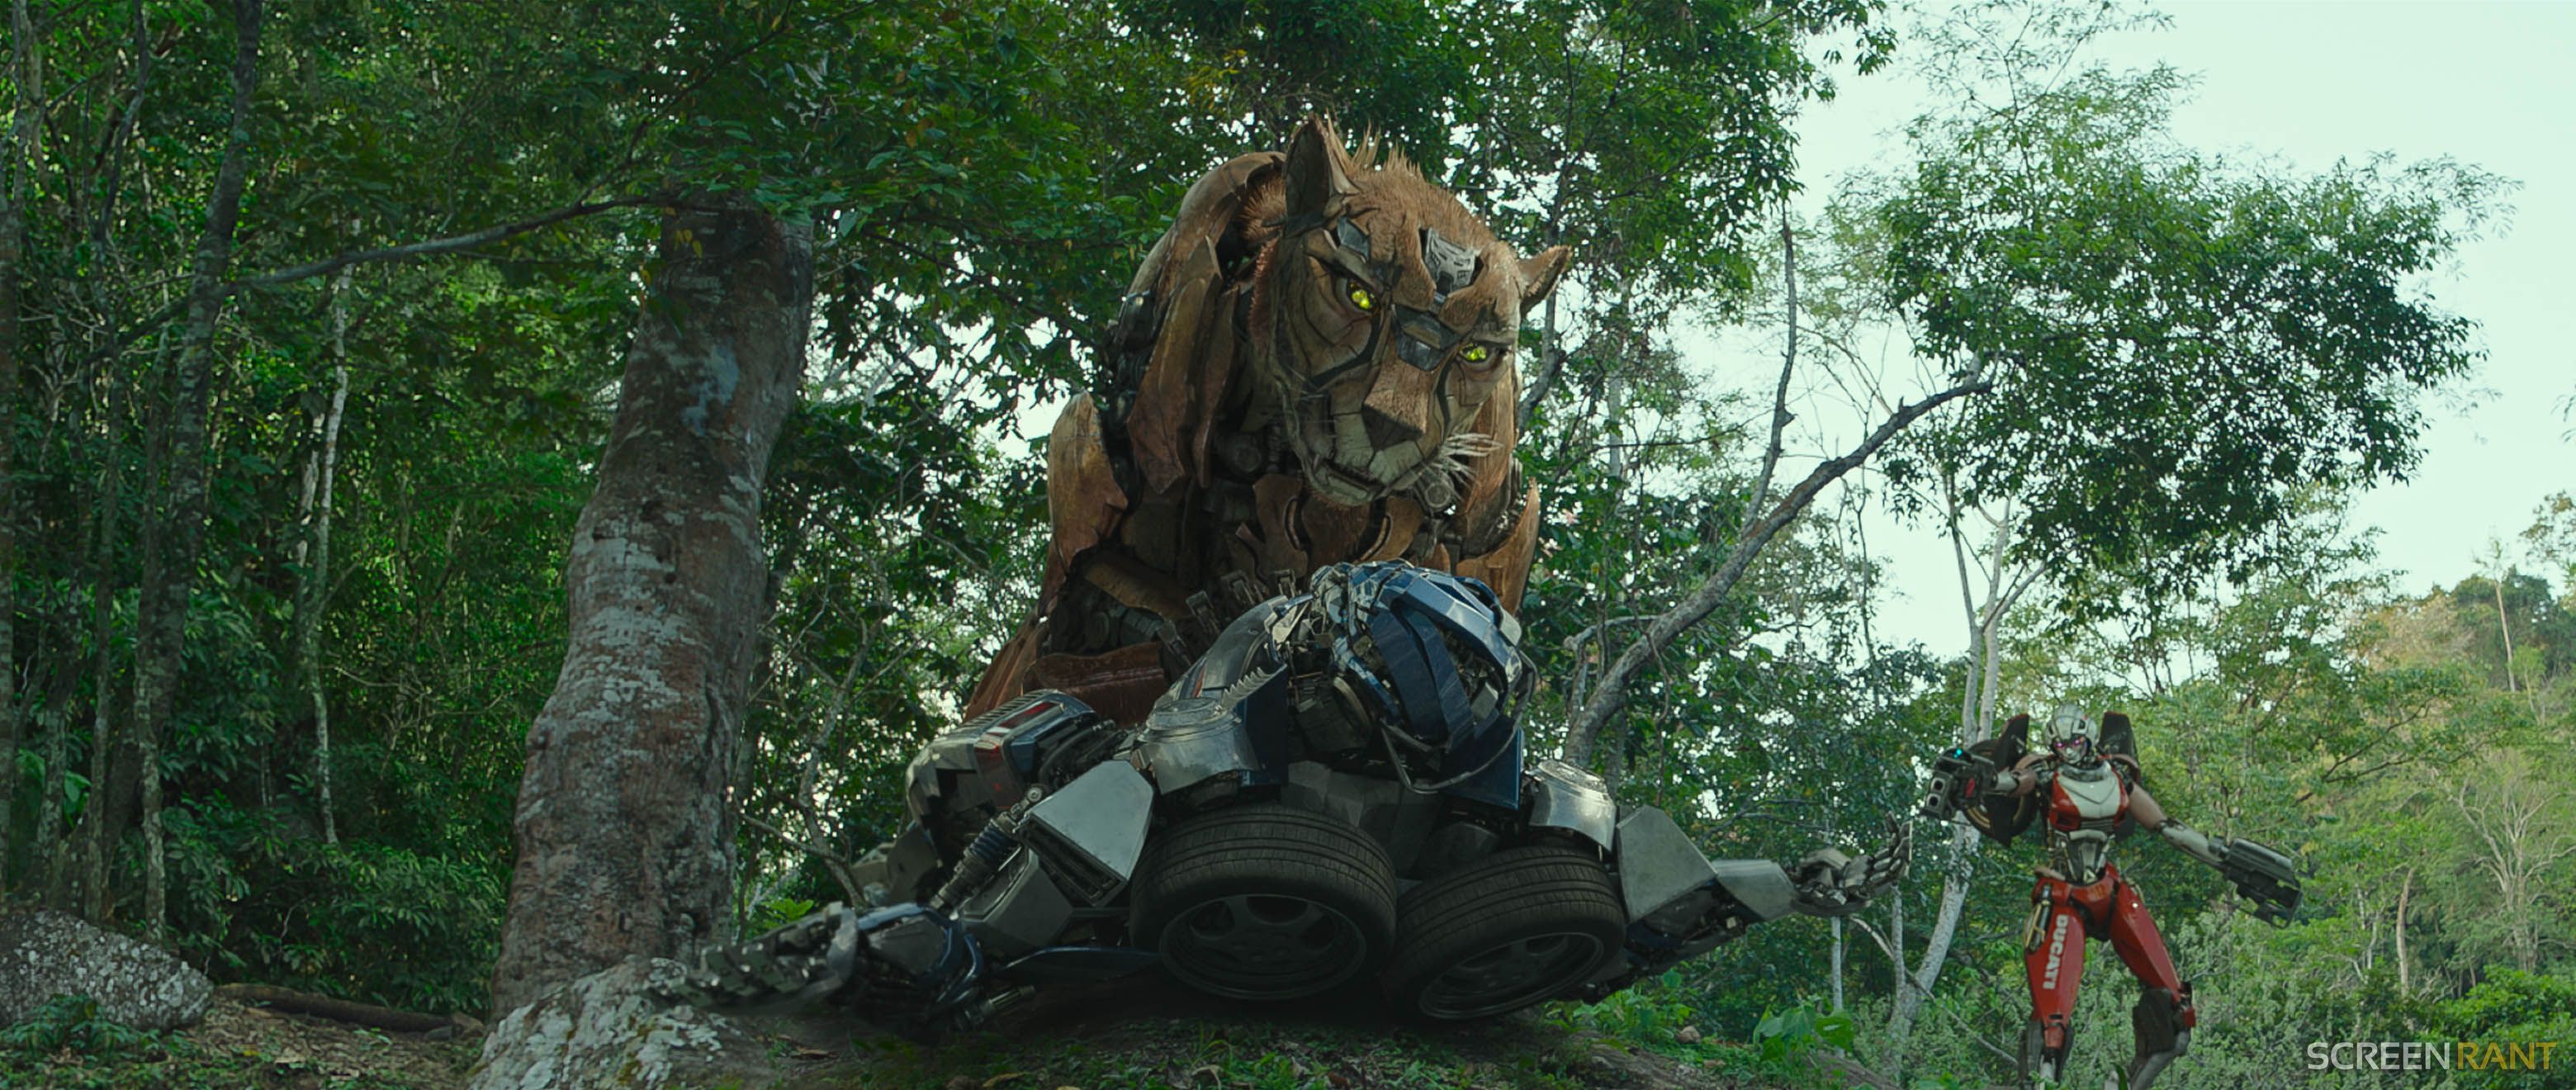 Transformers: Rise of the Beasts Image Celebrates An Iconic Maximal [EXCLUSIVE]